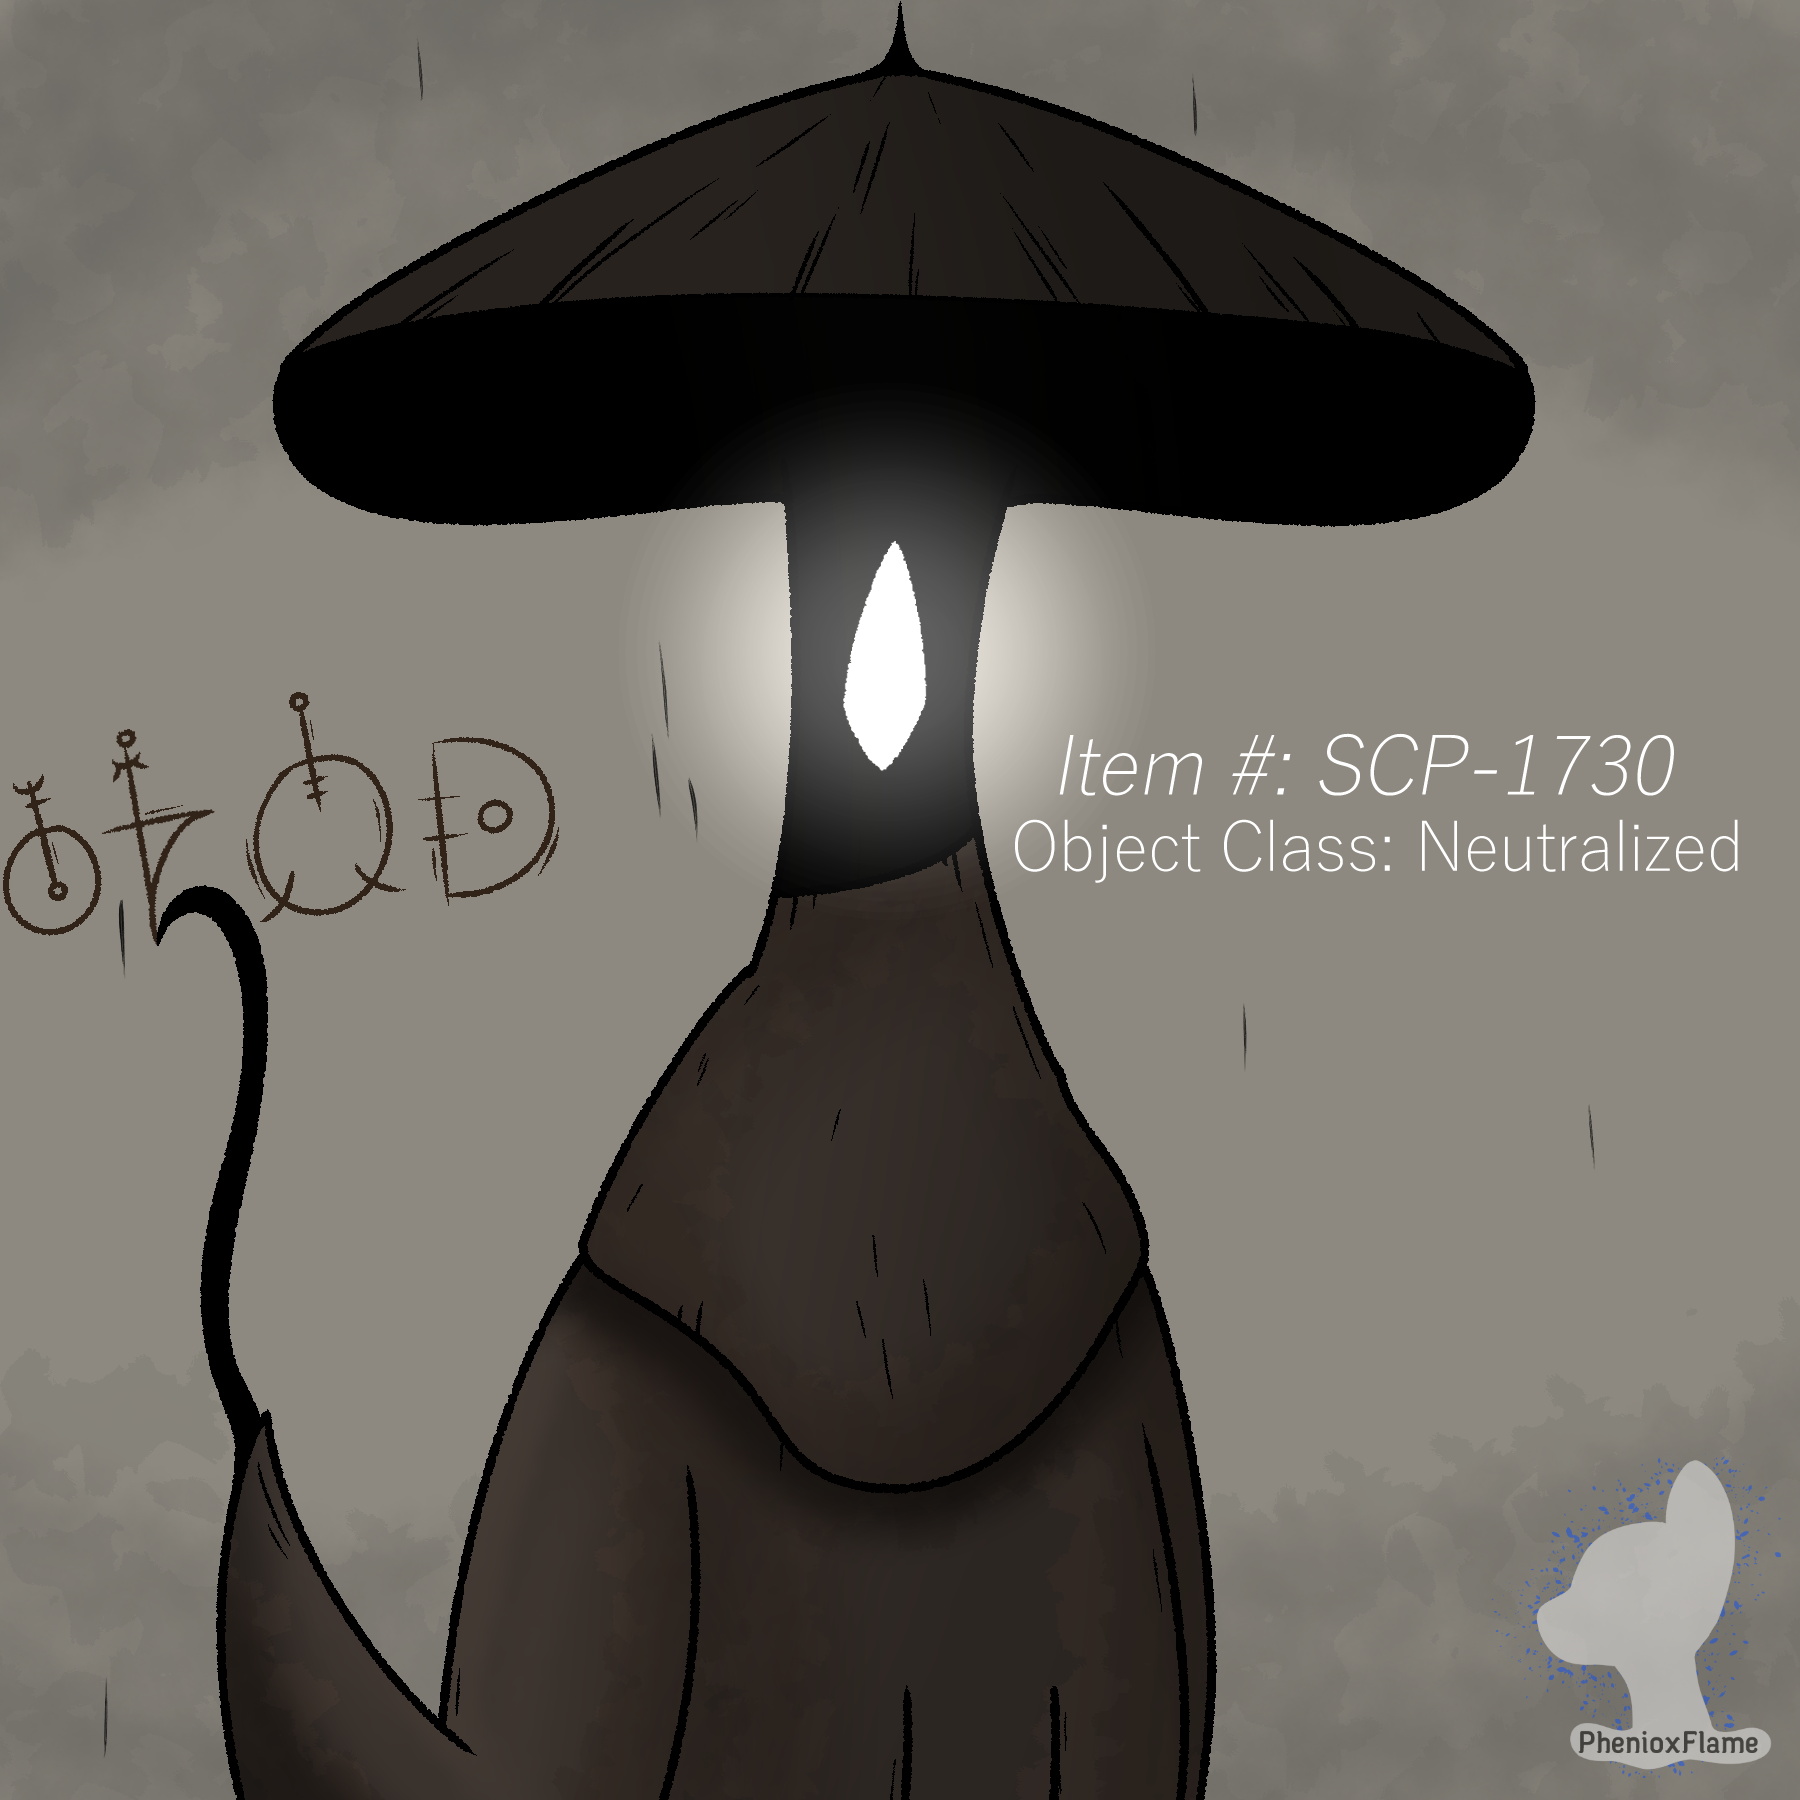 scp 1730, SCP Foundation